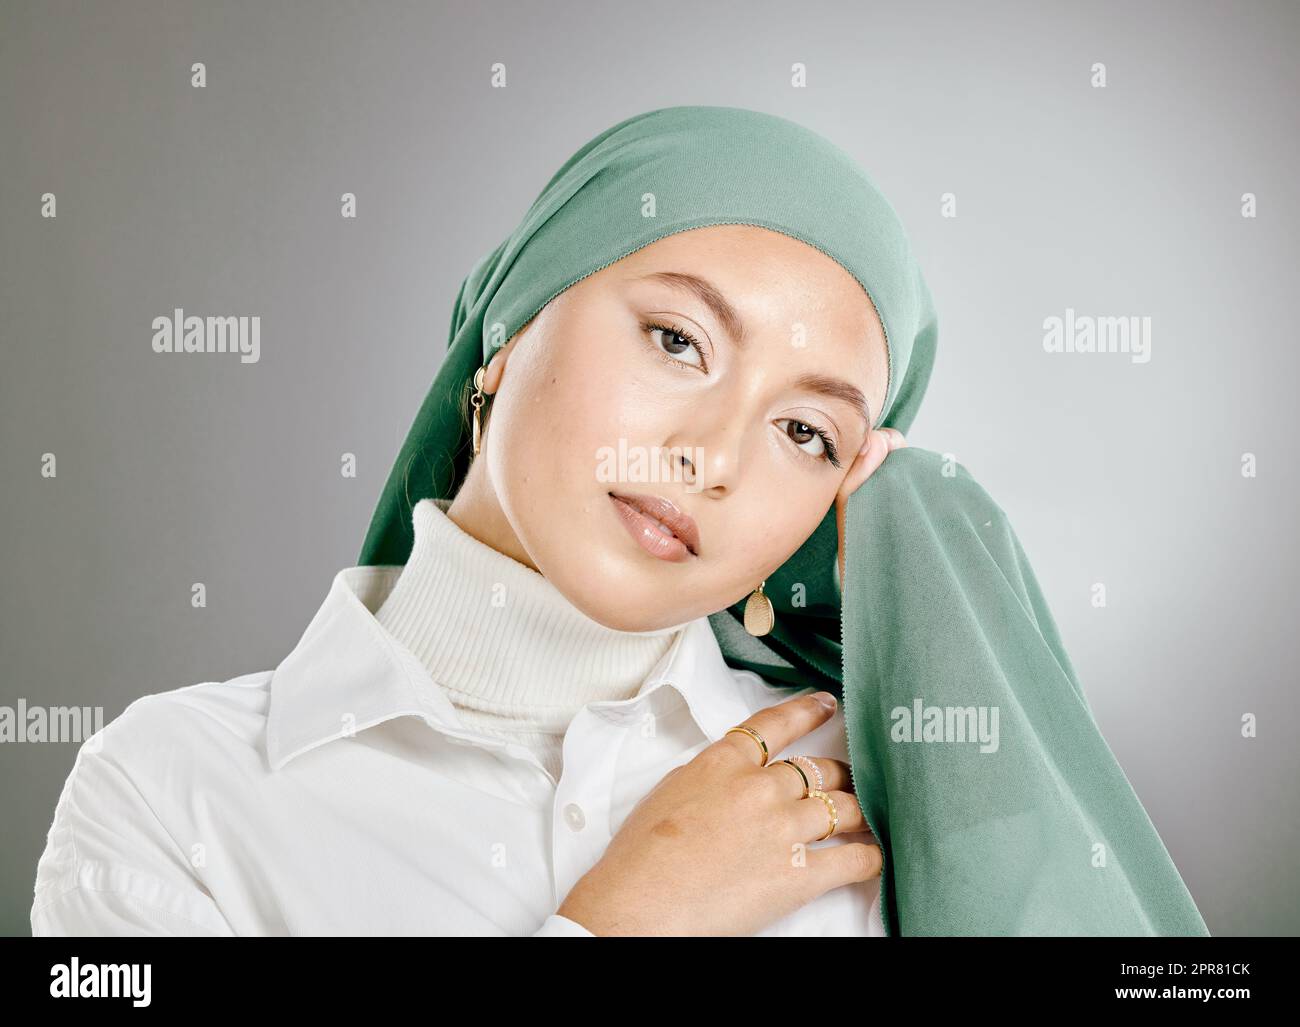 Studio portrait of beautiful muslim woman isolated against a grey background. Young woman wearing hijab or headscarf showing traditional arab modesty holding her hands together and looking at camera Stock Photo